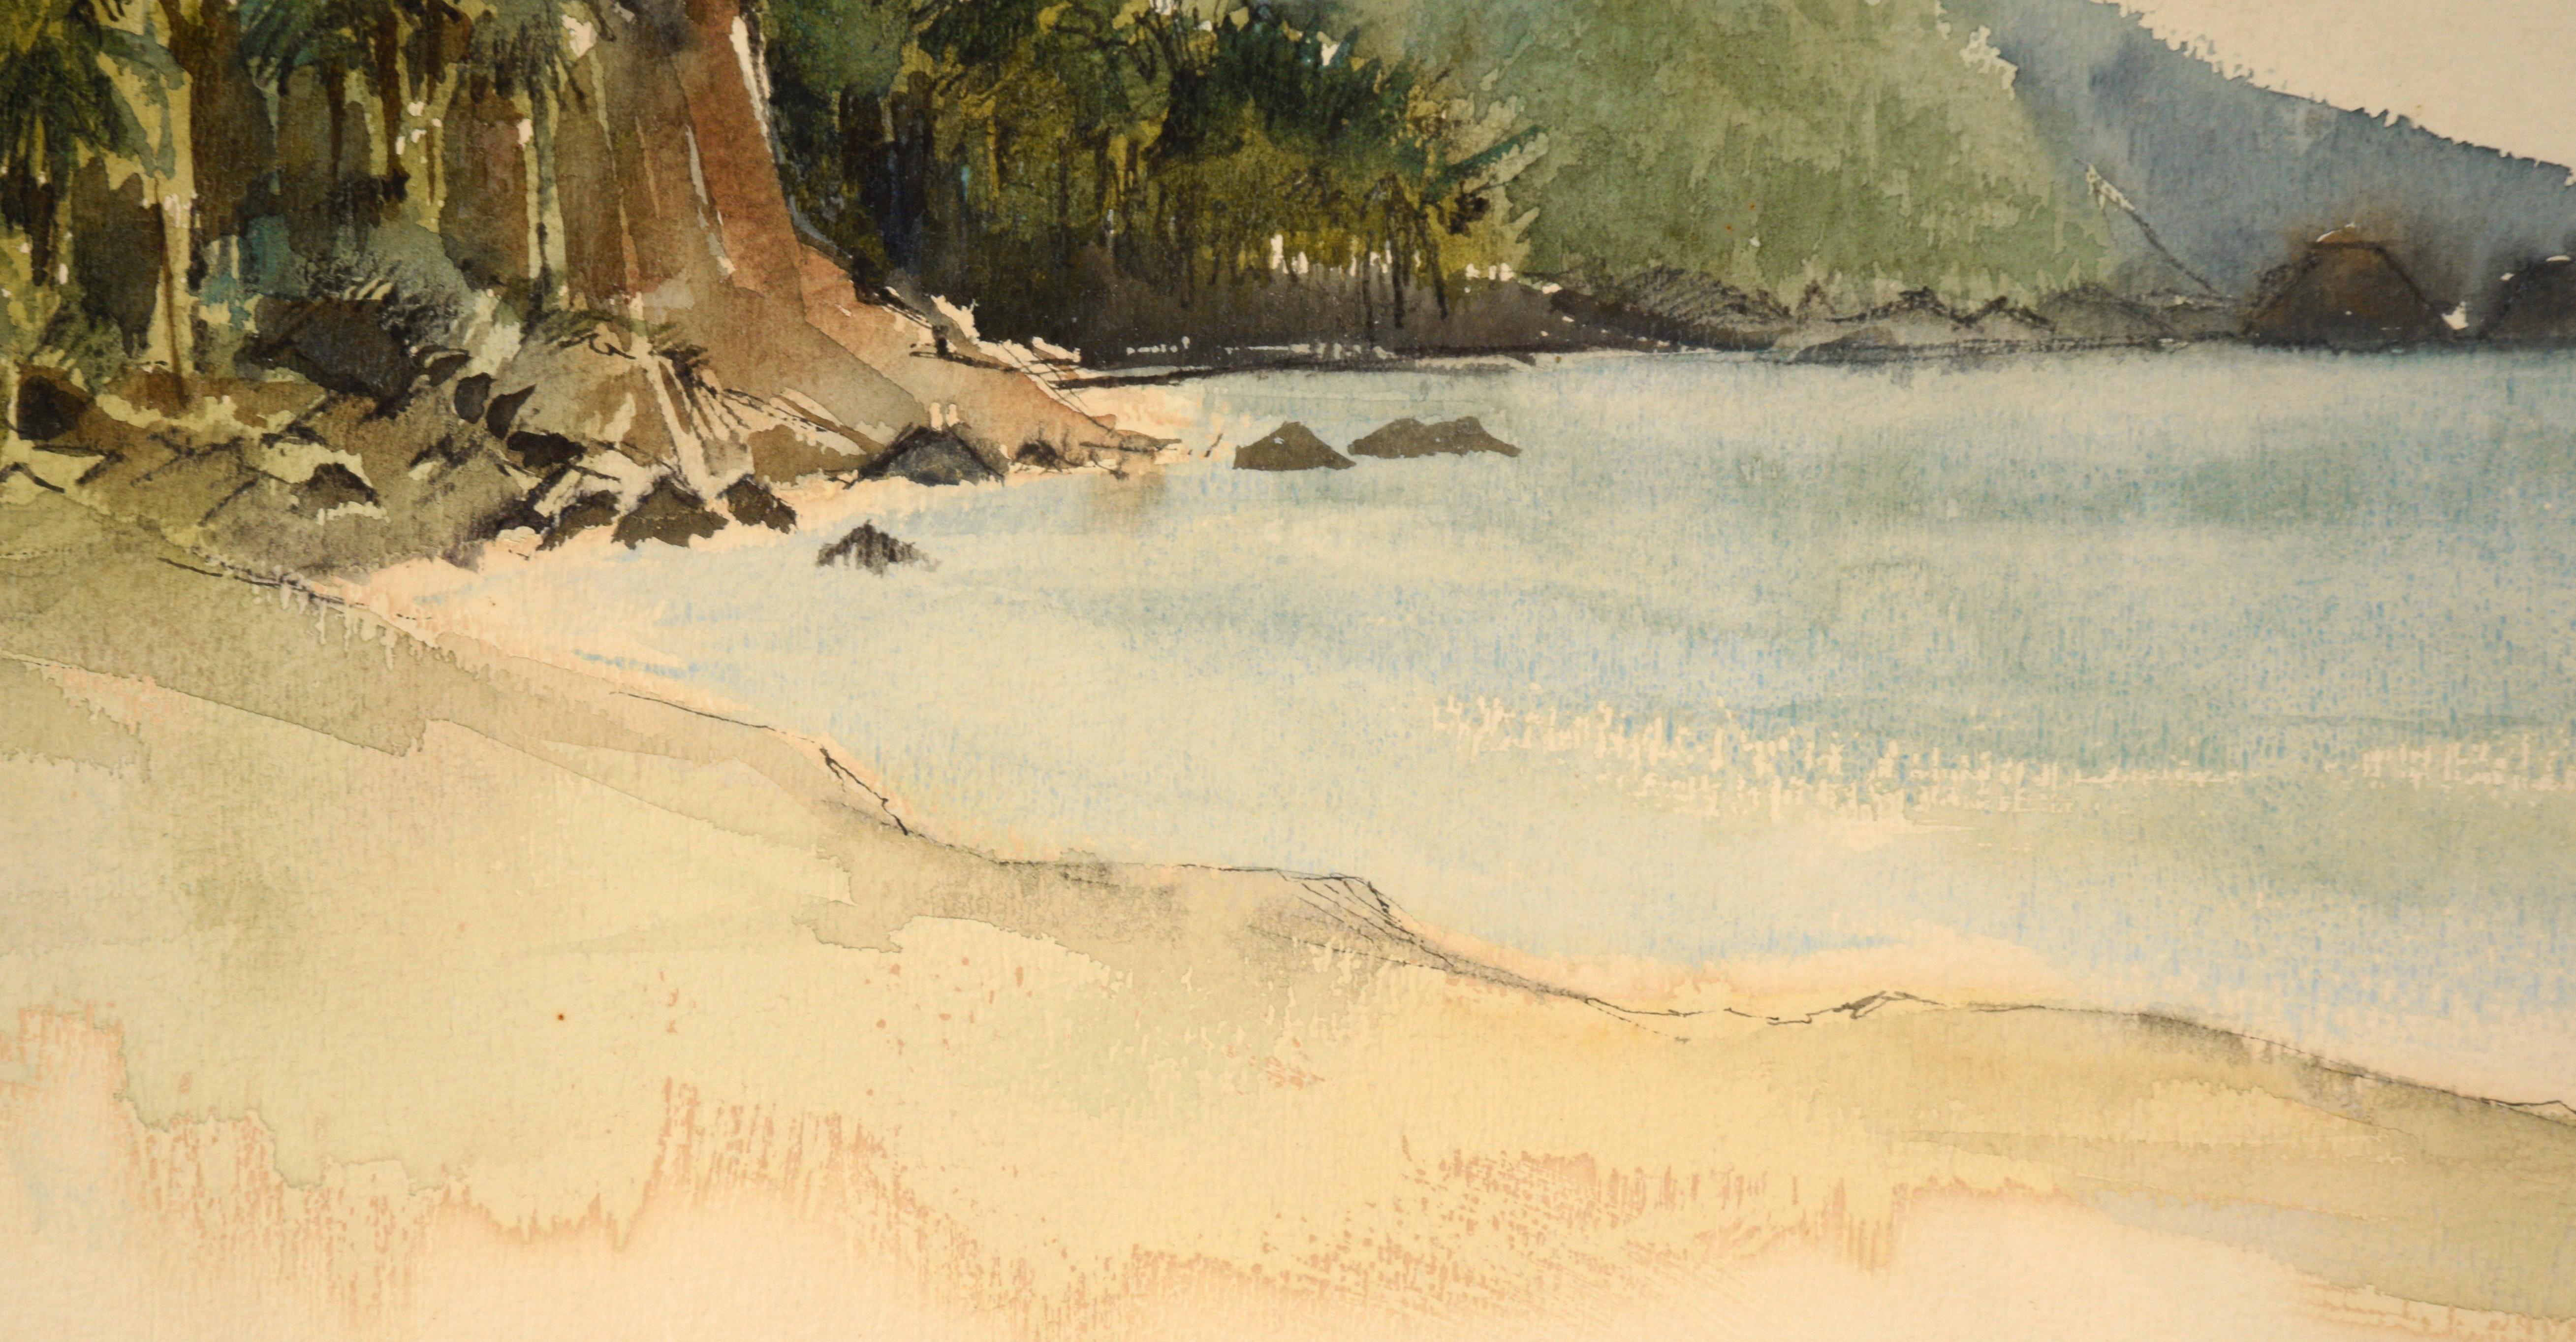 Hawaiian Tropical Beach and Mountains - Watercolor on Paper 1960 - Impressionist Art by Unknown